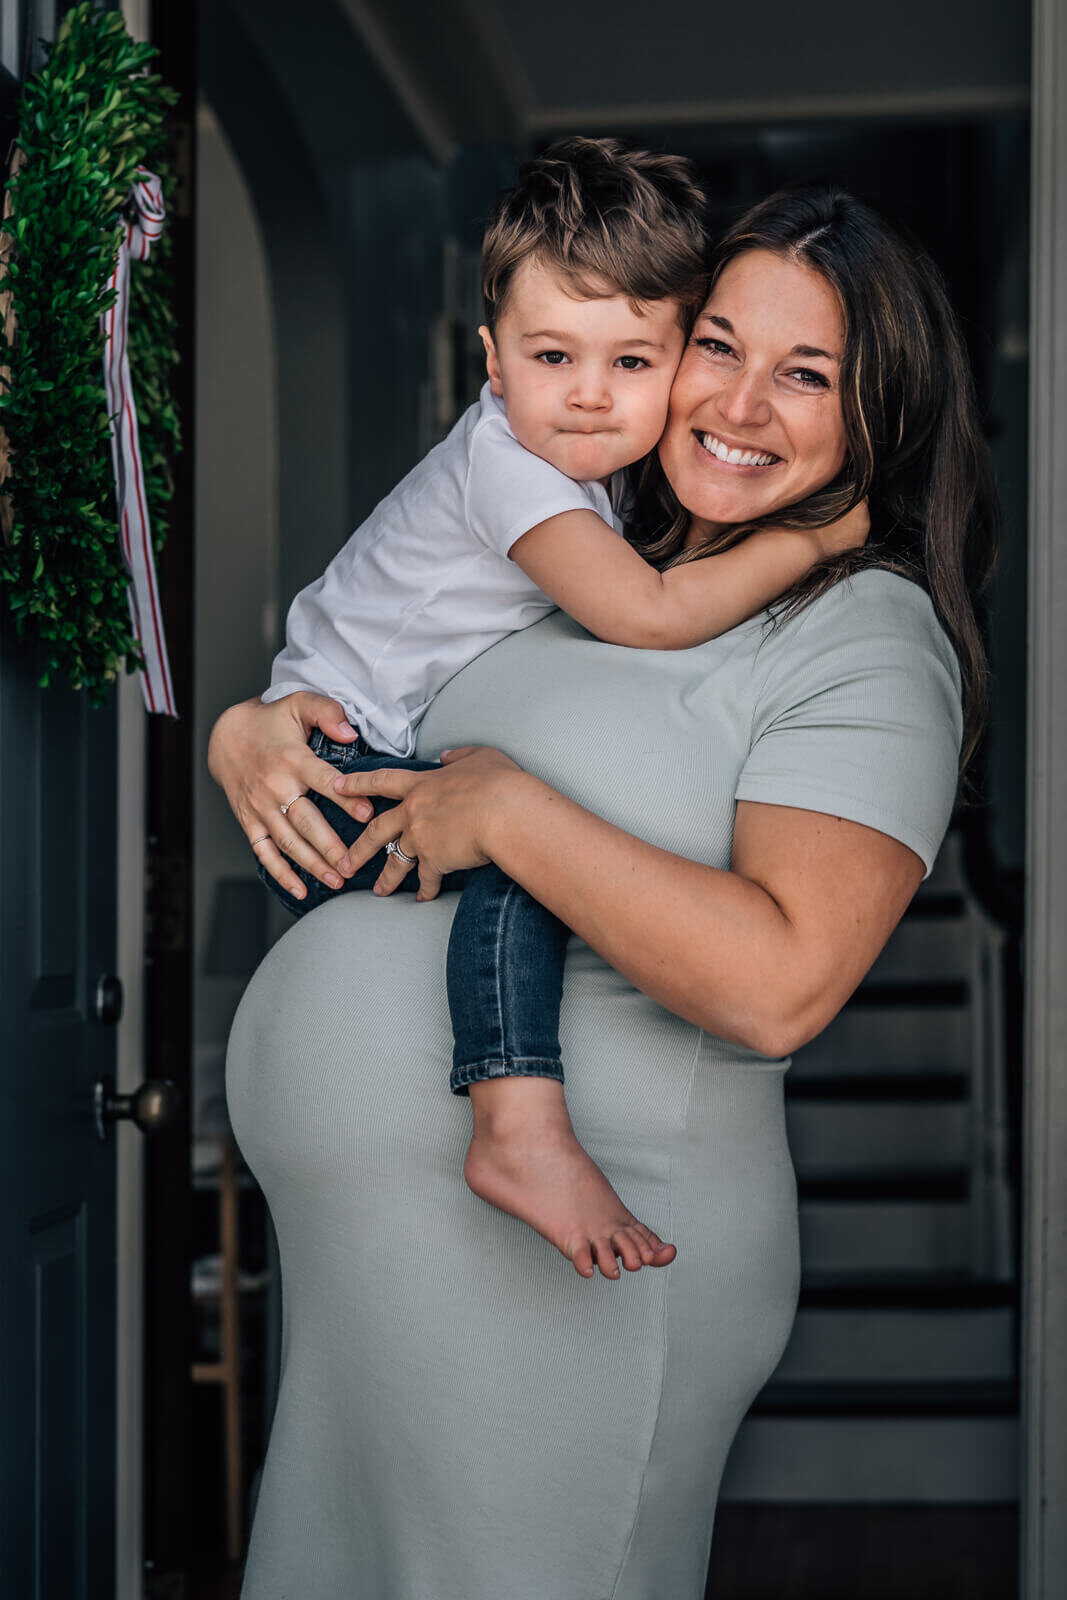 A toddler straddles his mother, atop her baby bump, framed by a doorway during a photo session.